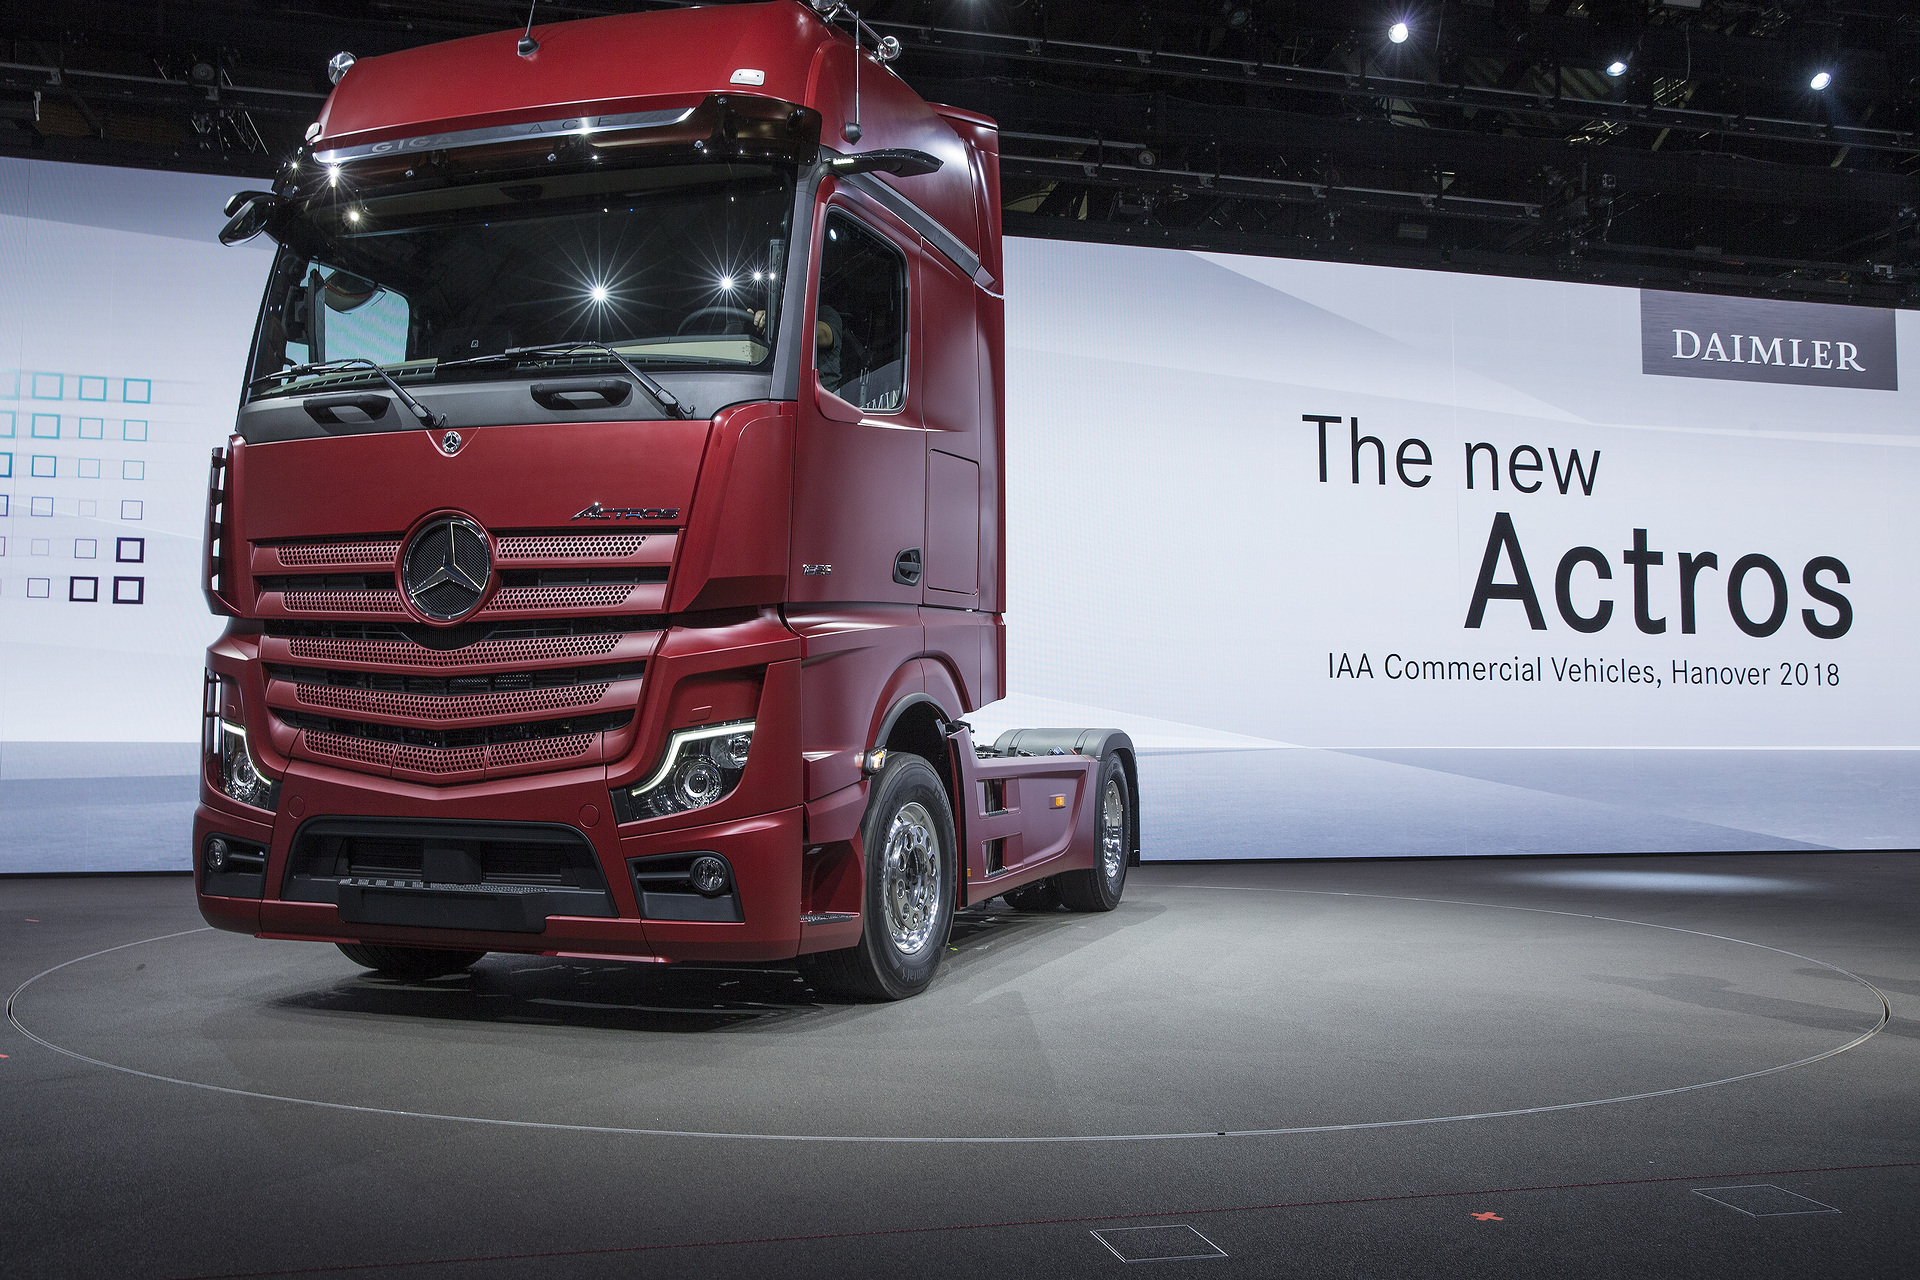 Daimler at the IAA 2018 in Hannover